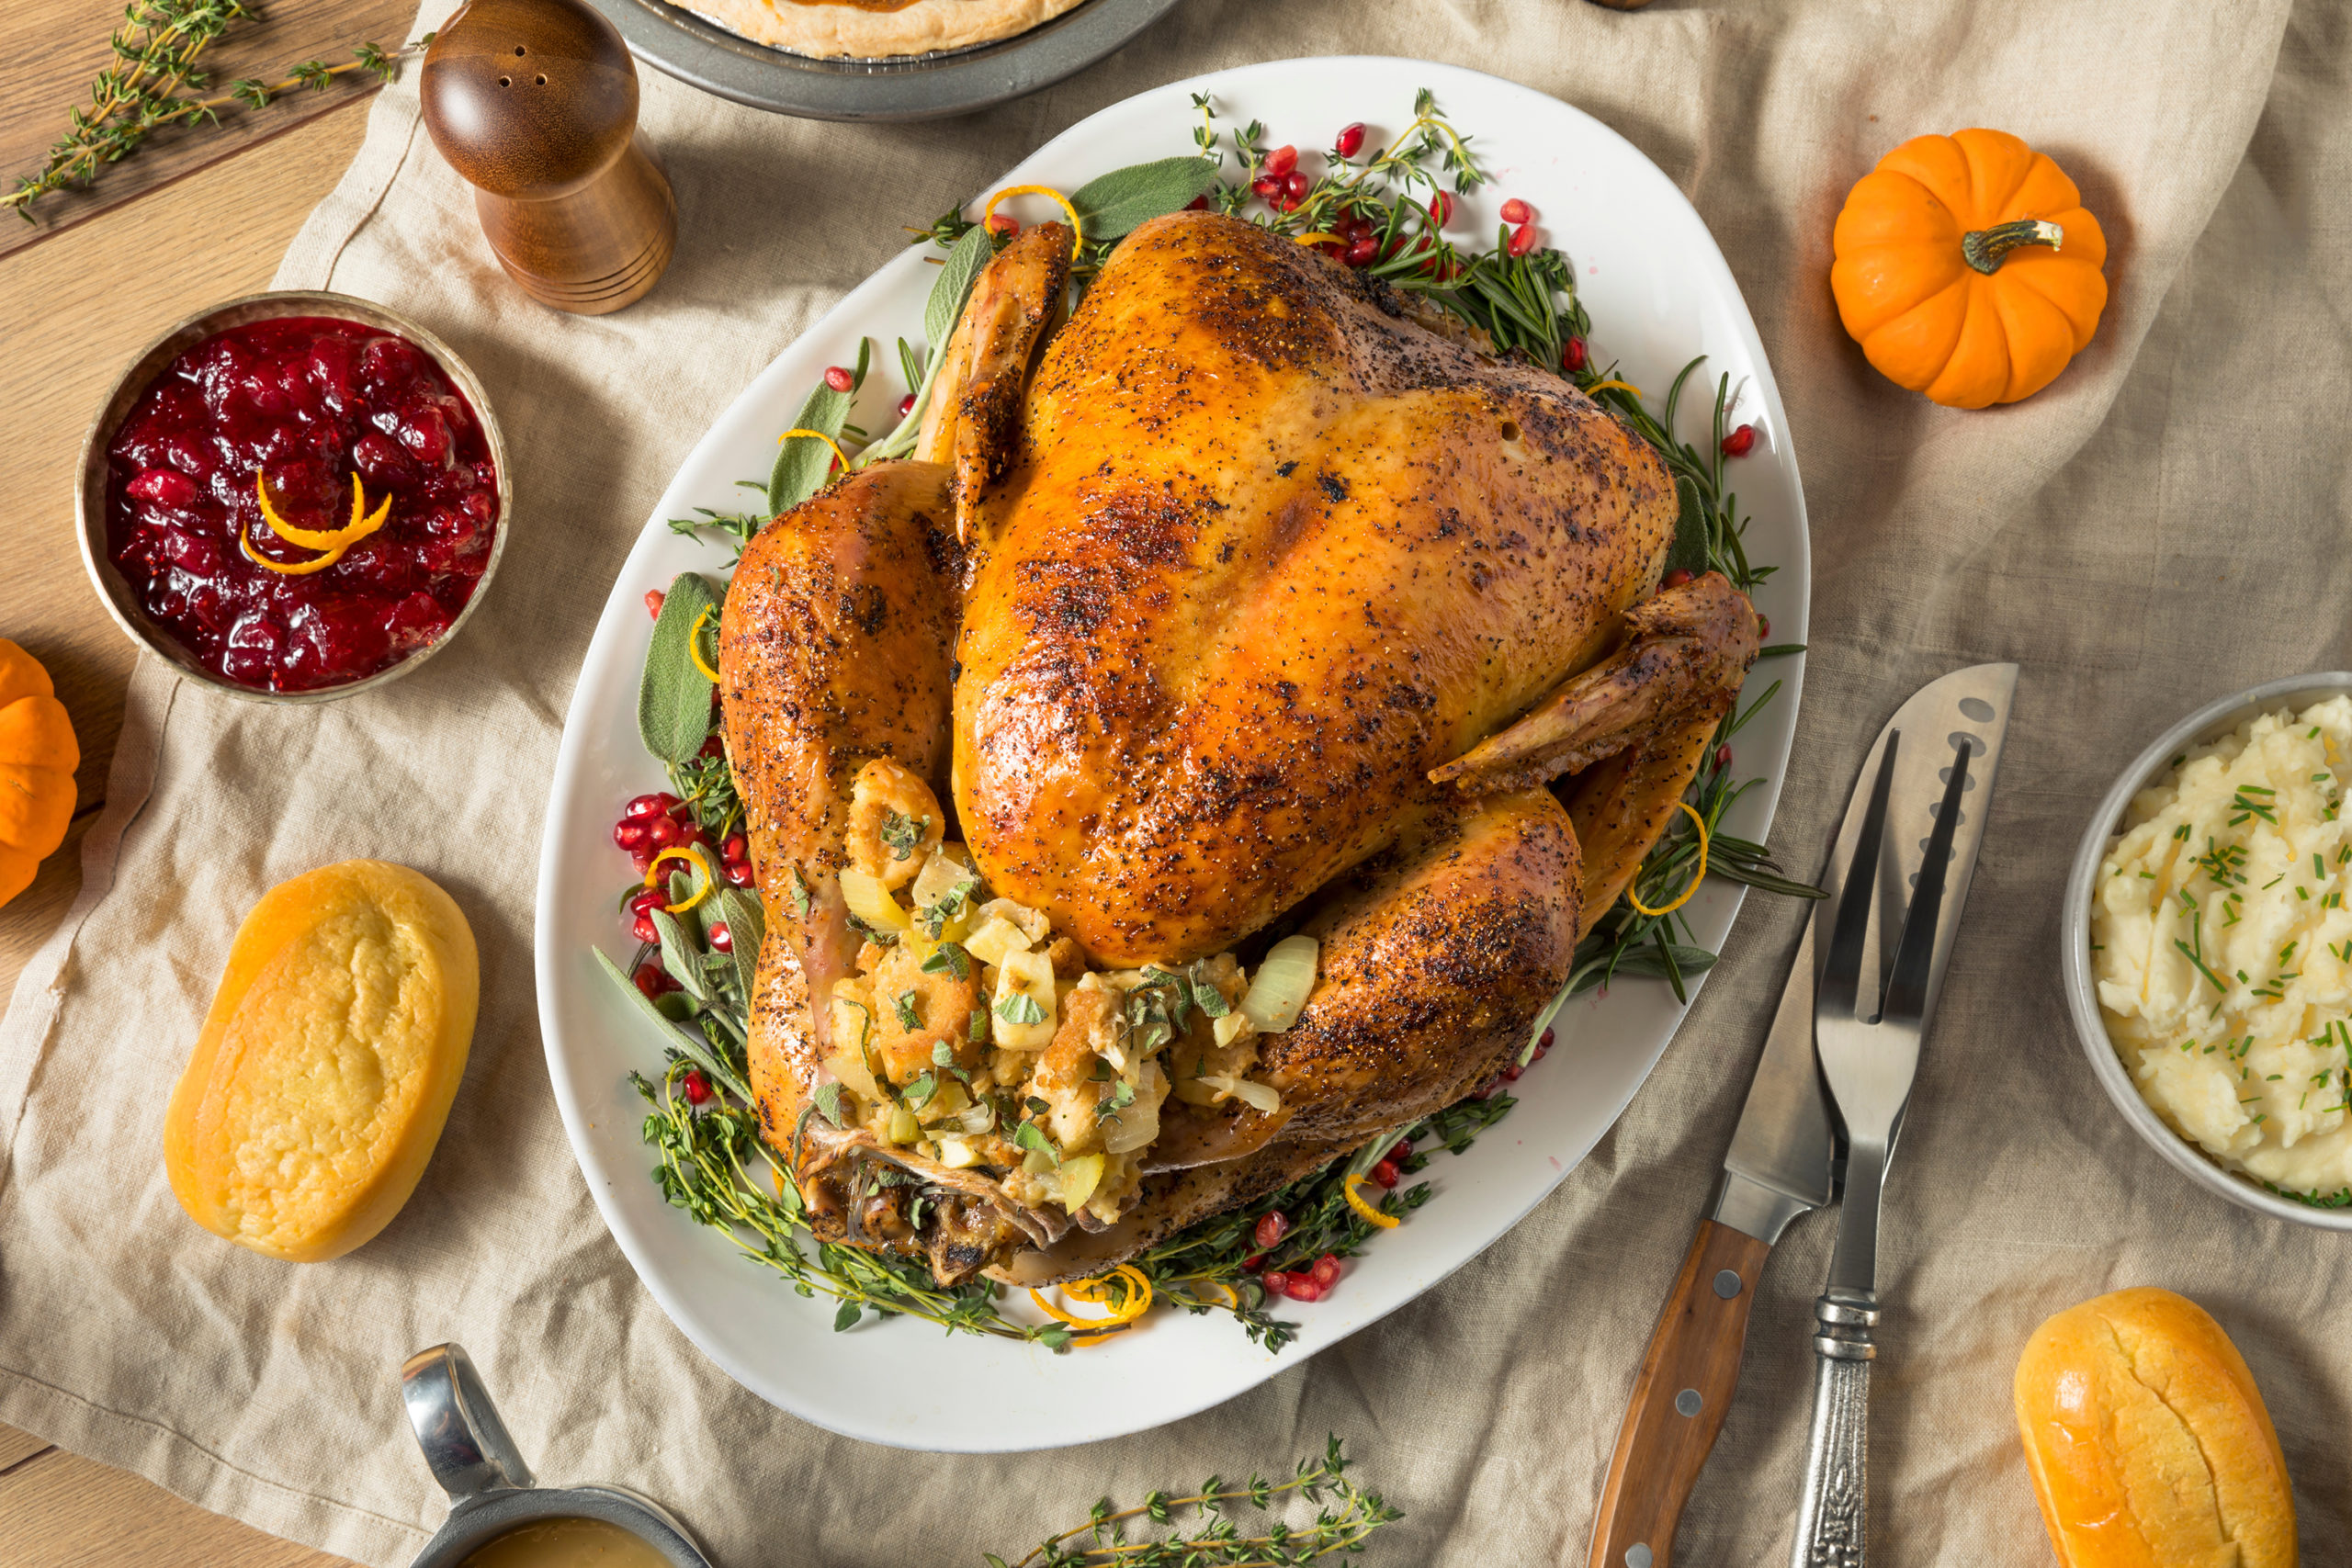 Whole Roasted Turkey Dinner For Thanksgiving with All the Sides (Adobe stock)...